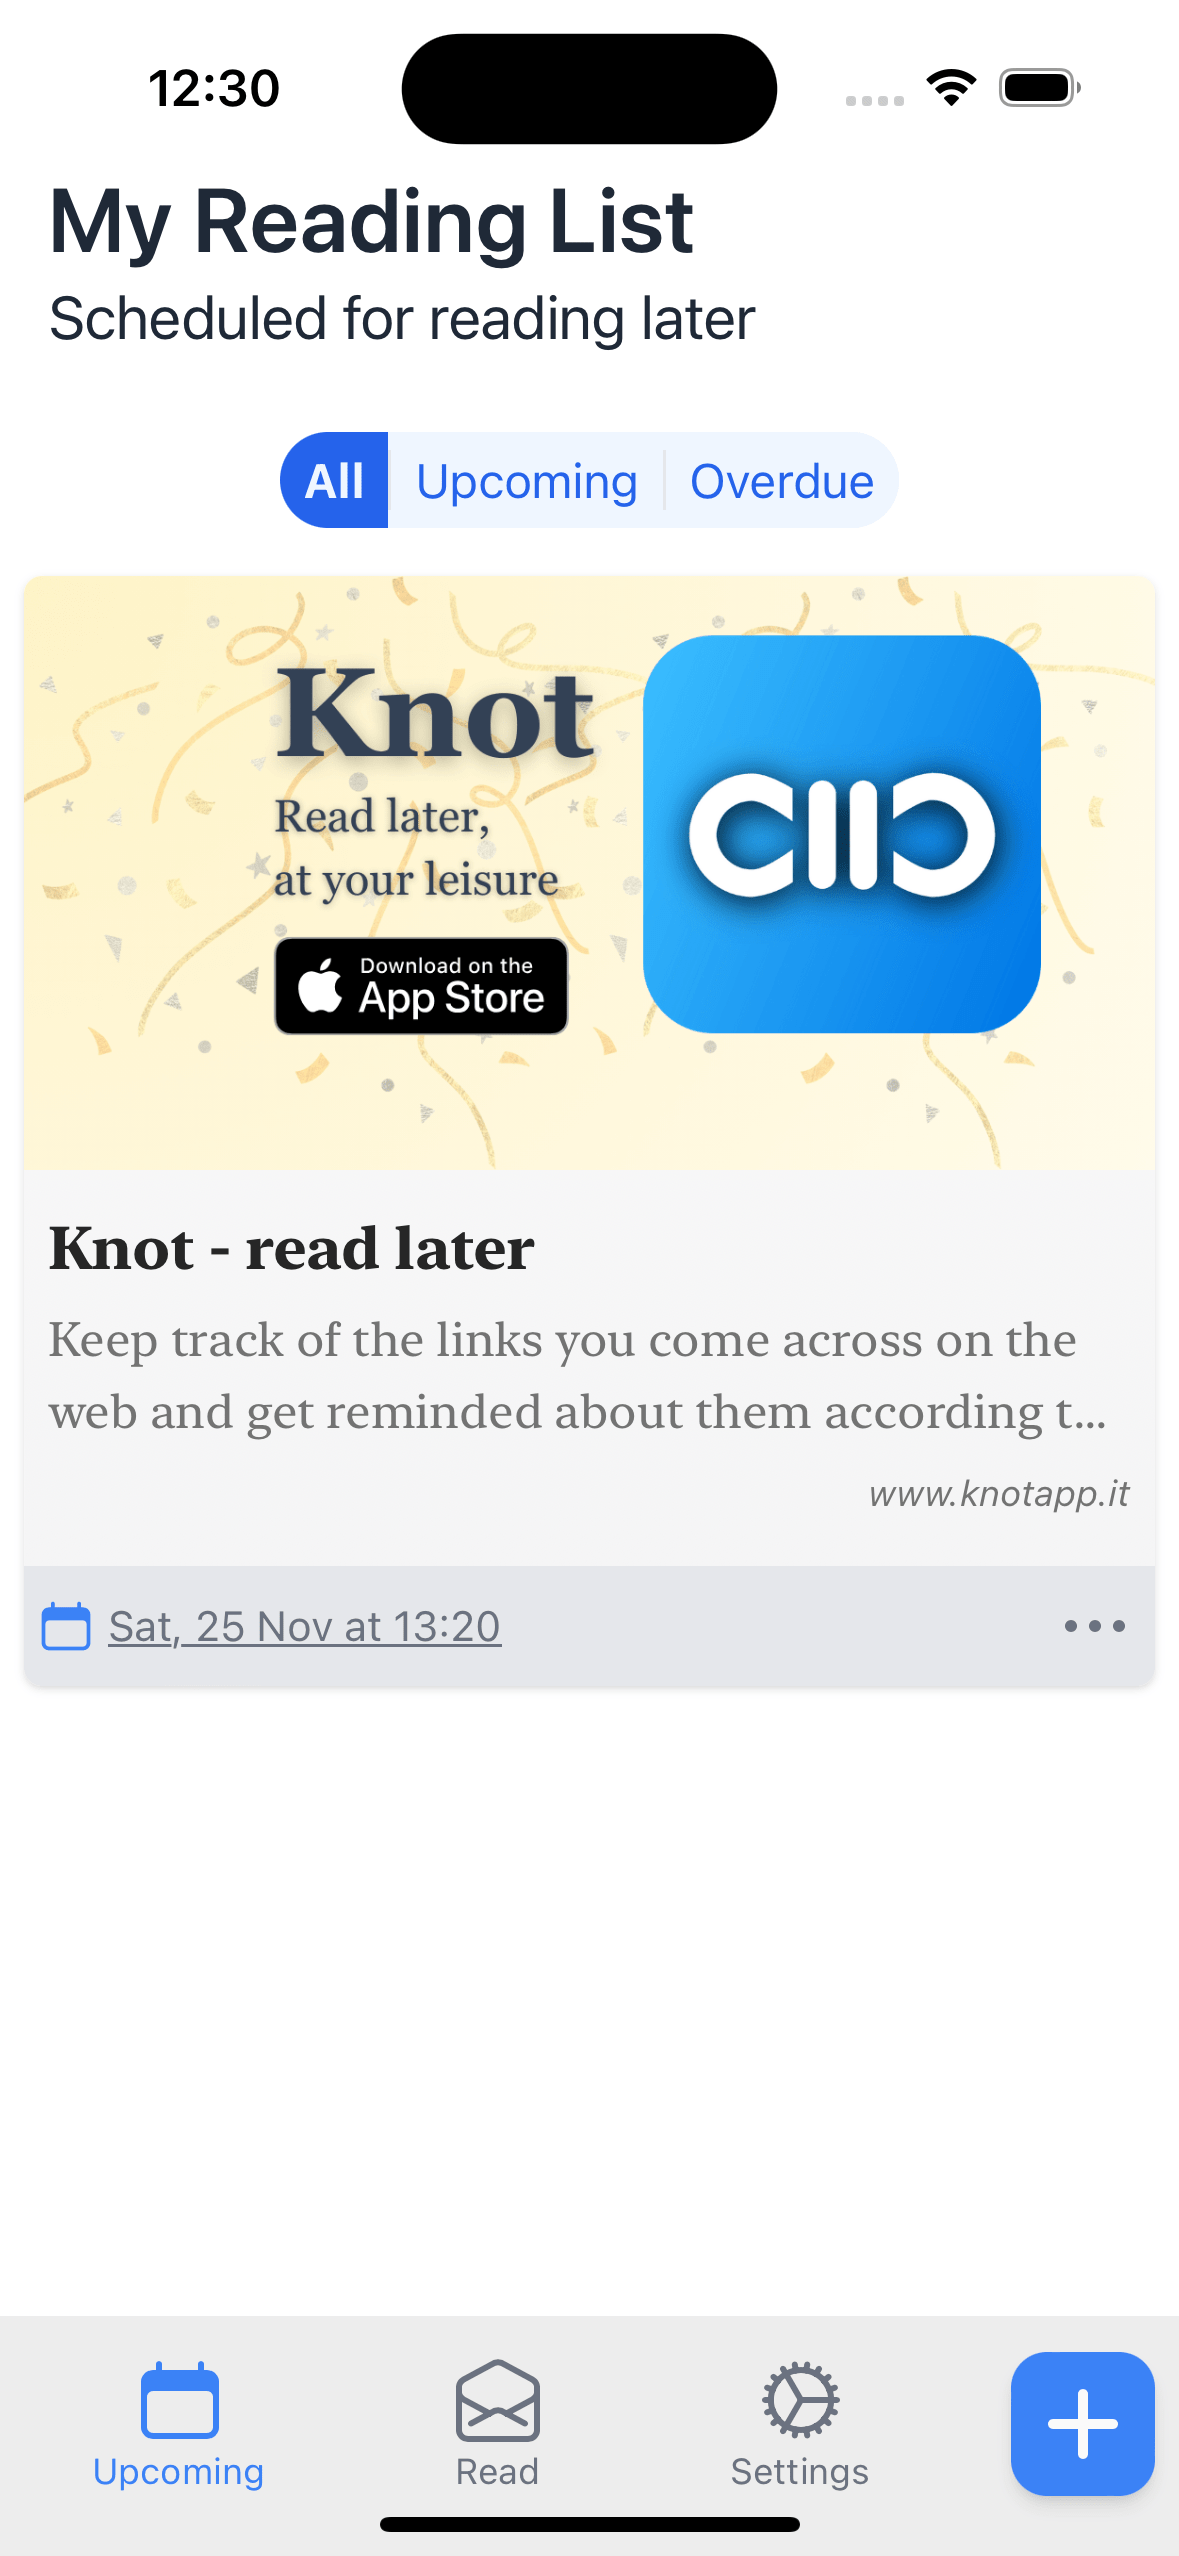 Knot screenshot showing this landing page bookmarked in the app